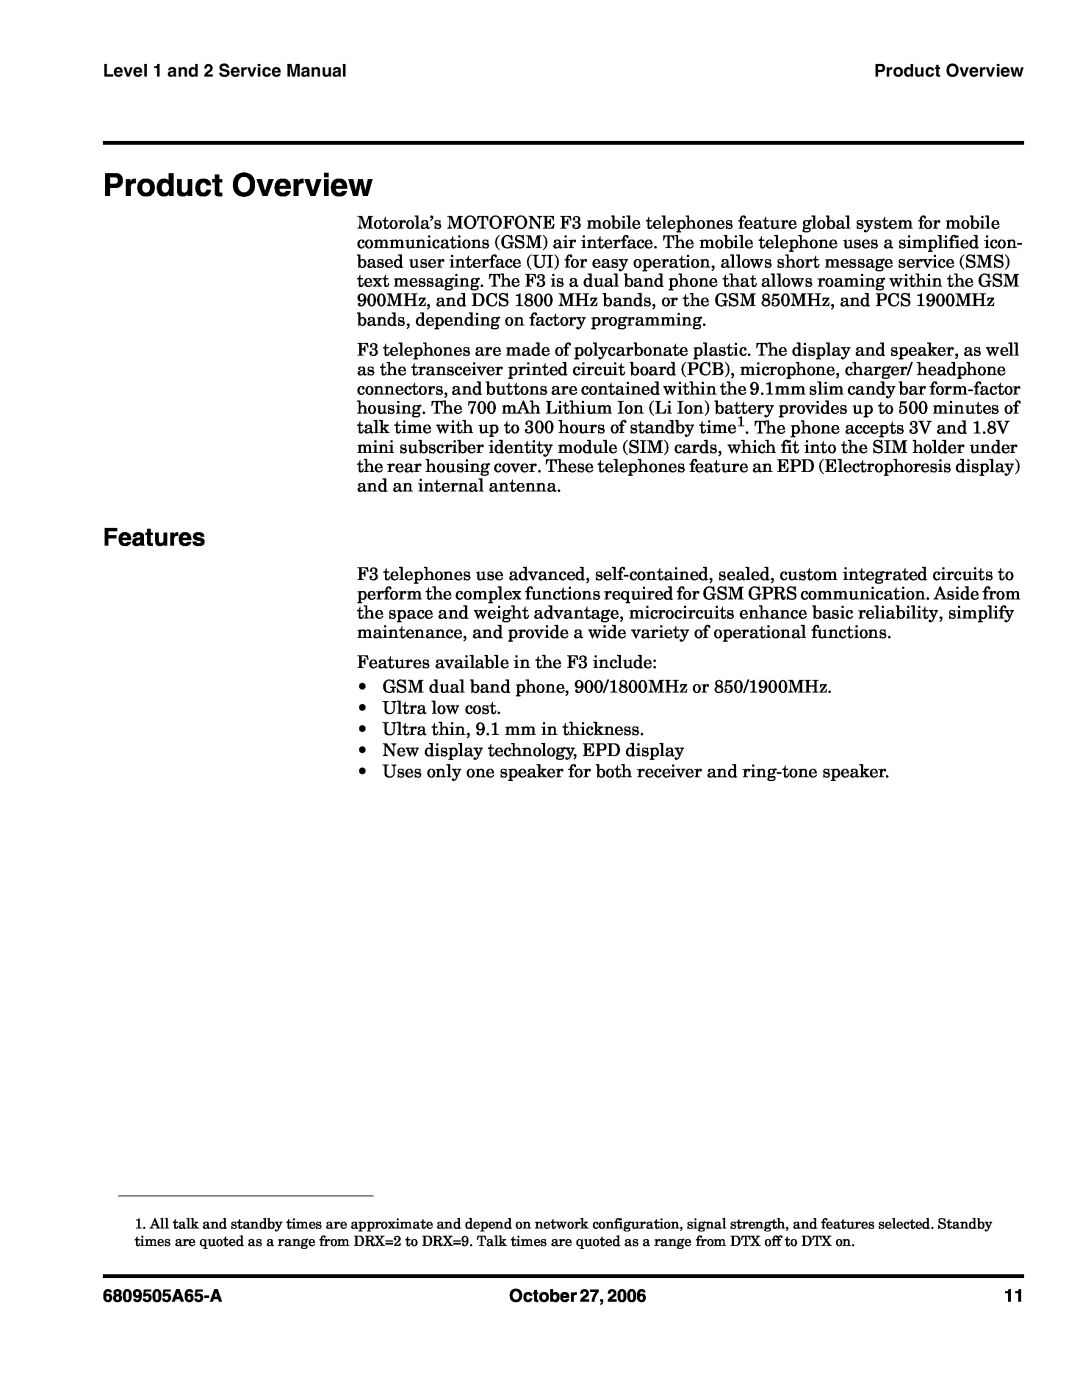 Motorola F3 service manual Product Overview, Features, Level 1 and 2 Service Manual, 6809505A65-A, October 27 